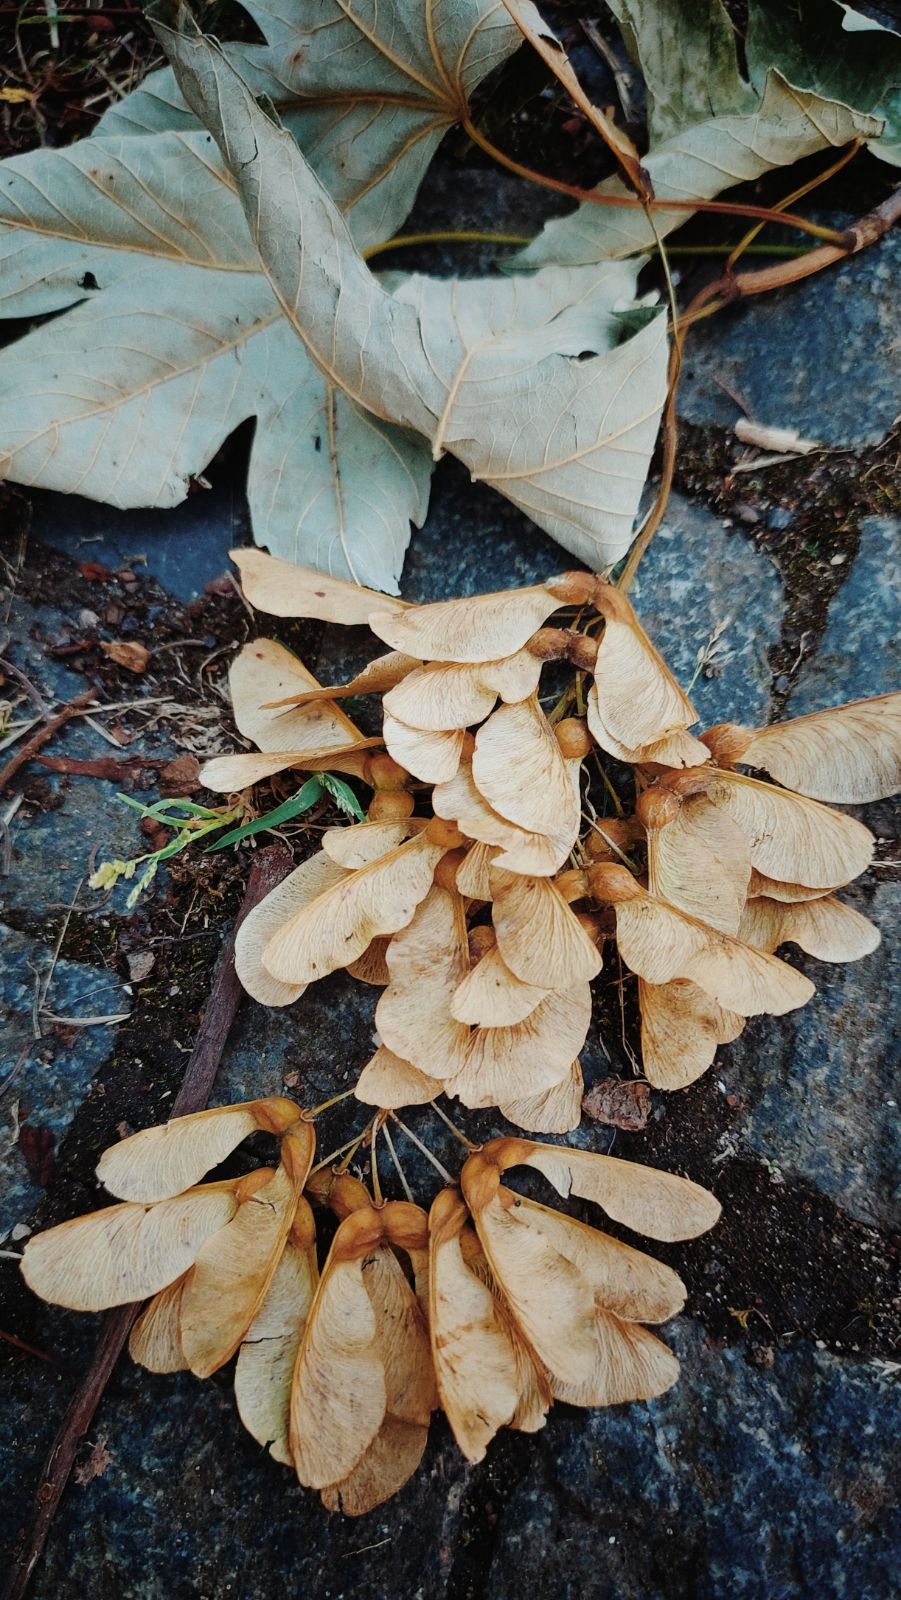 Seeds and leaves on a path of stones.